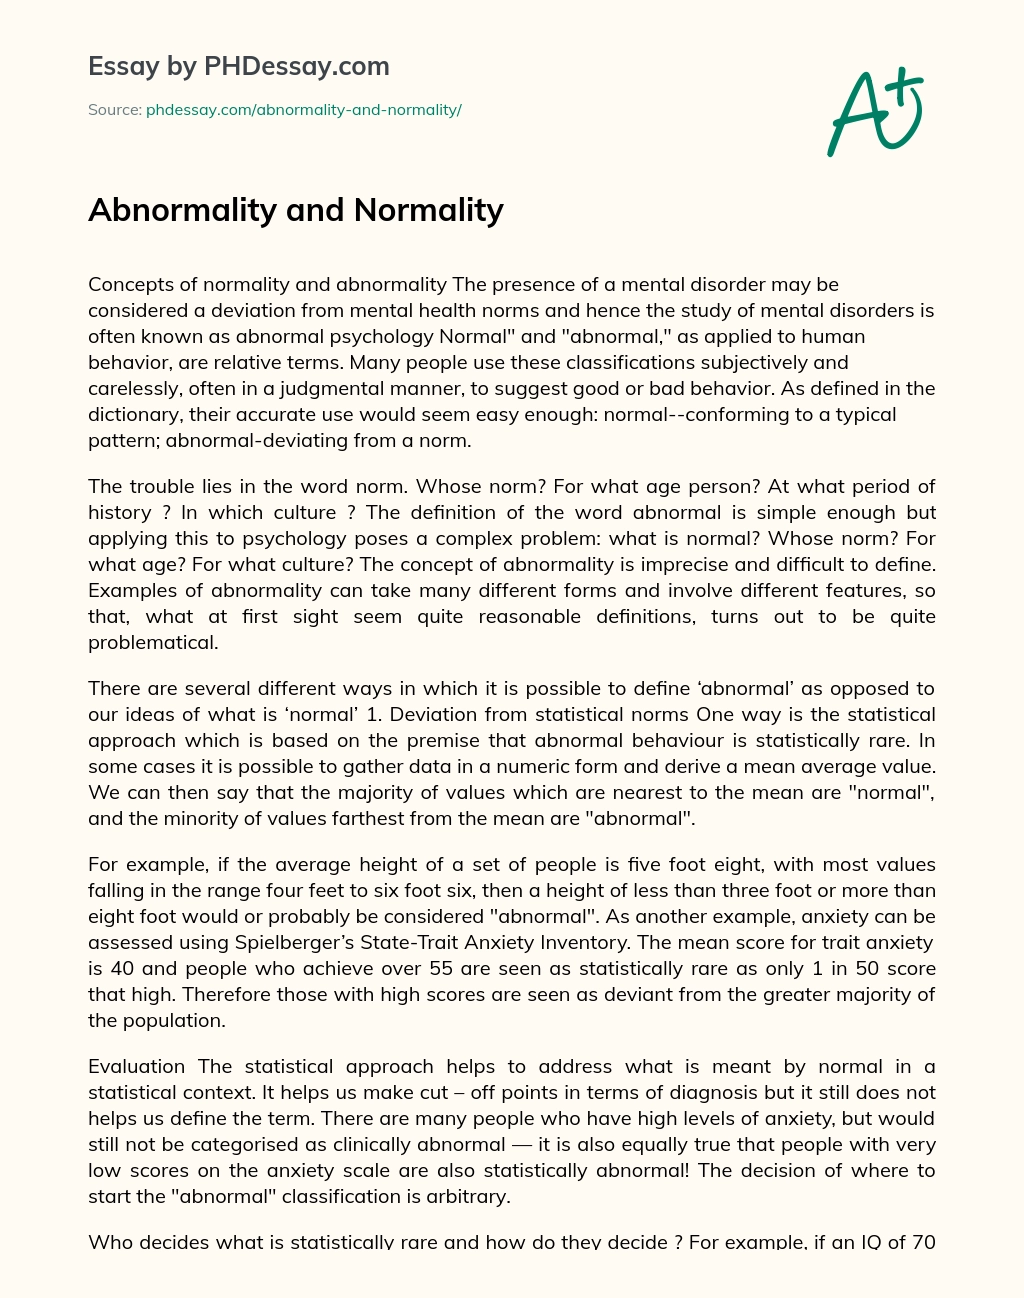 Abnormality and Normality essay